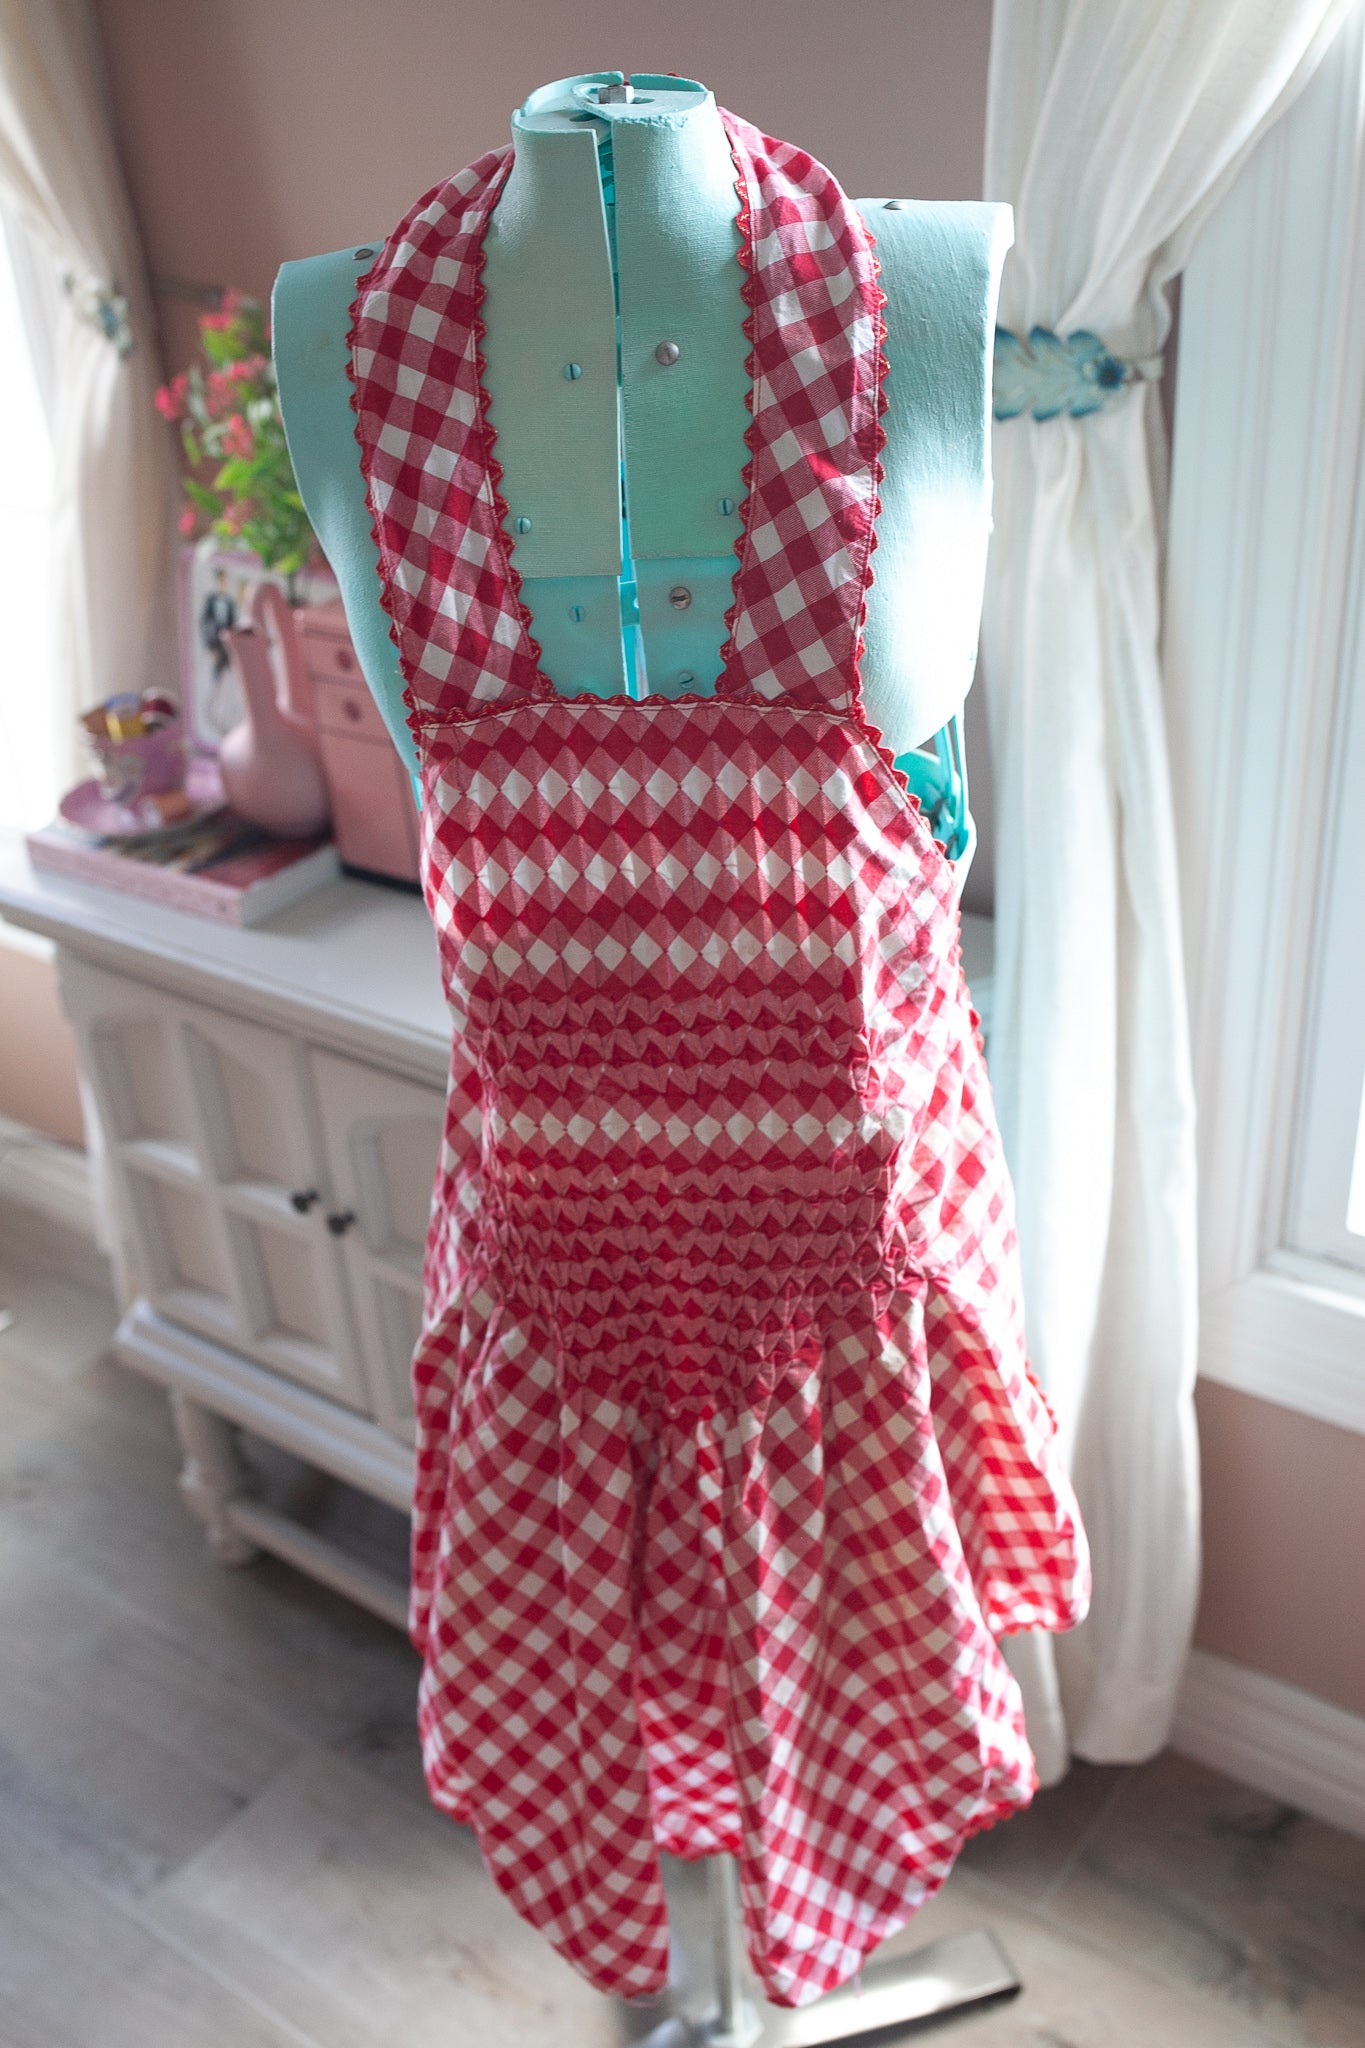 Vintage Apron- Full apron - Red and White Apron